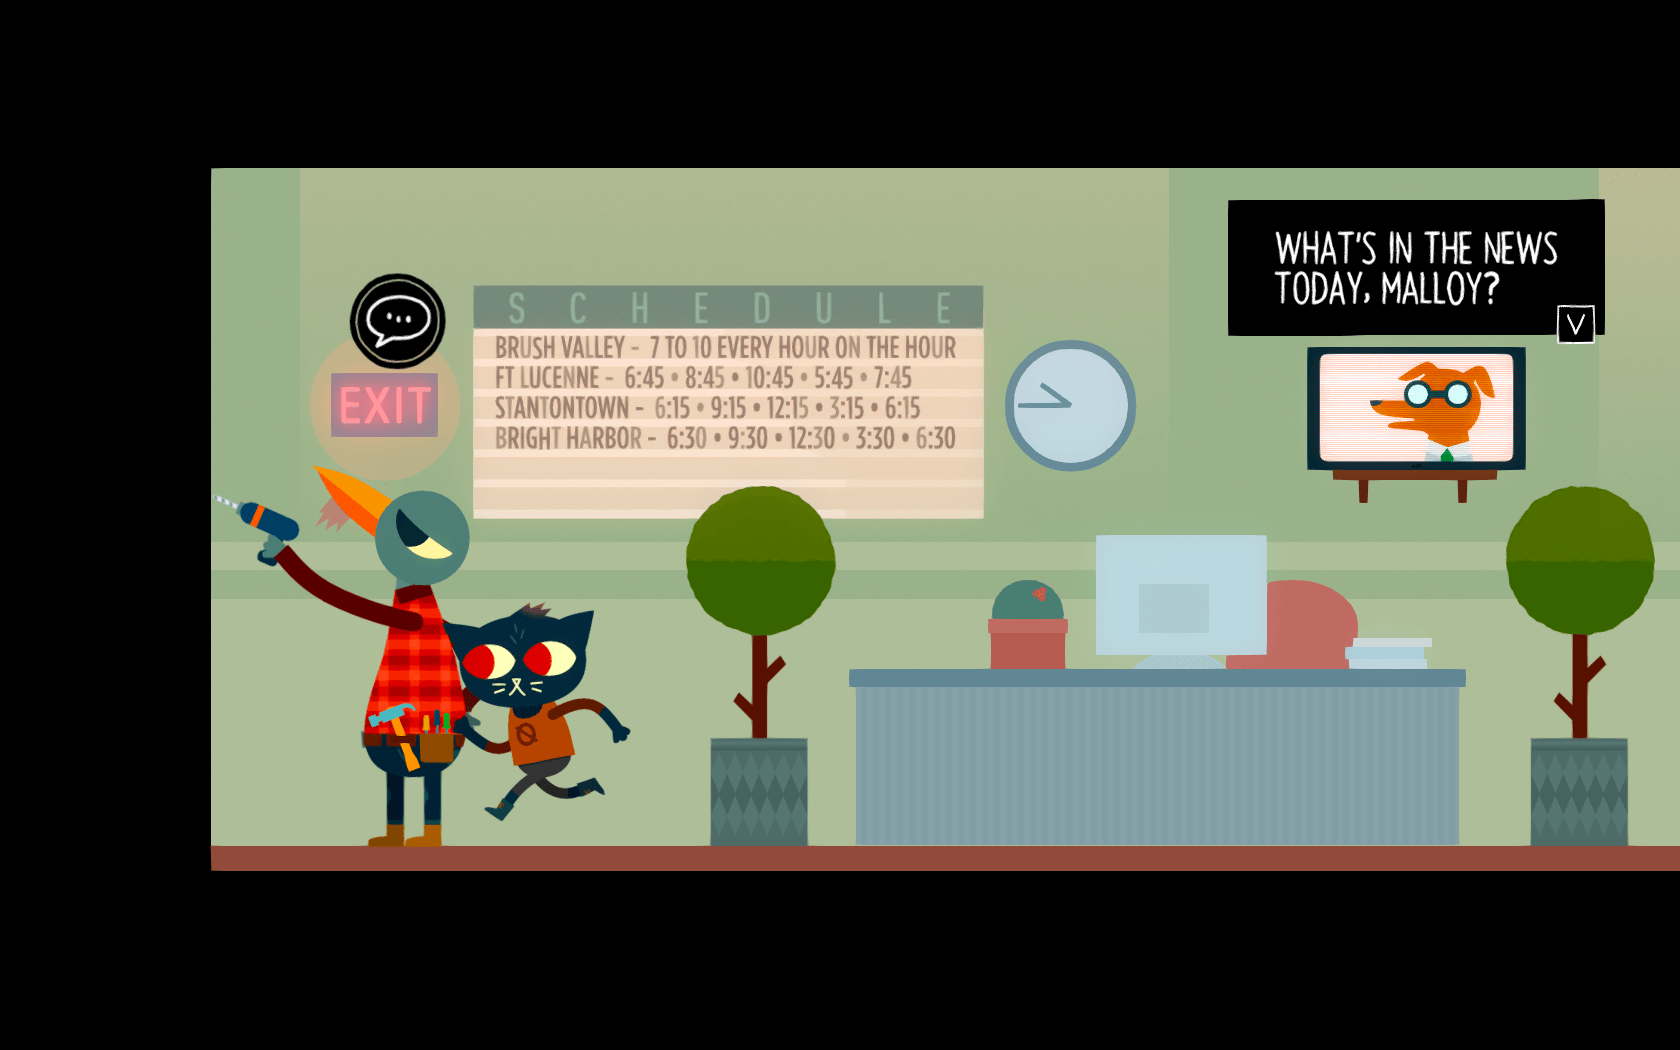 night in the woods weird autumn edition ending